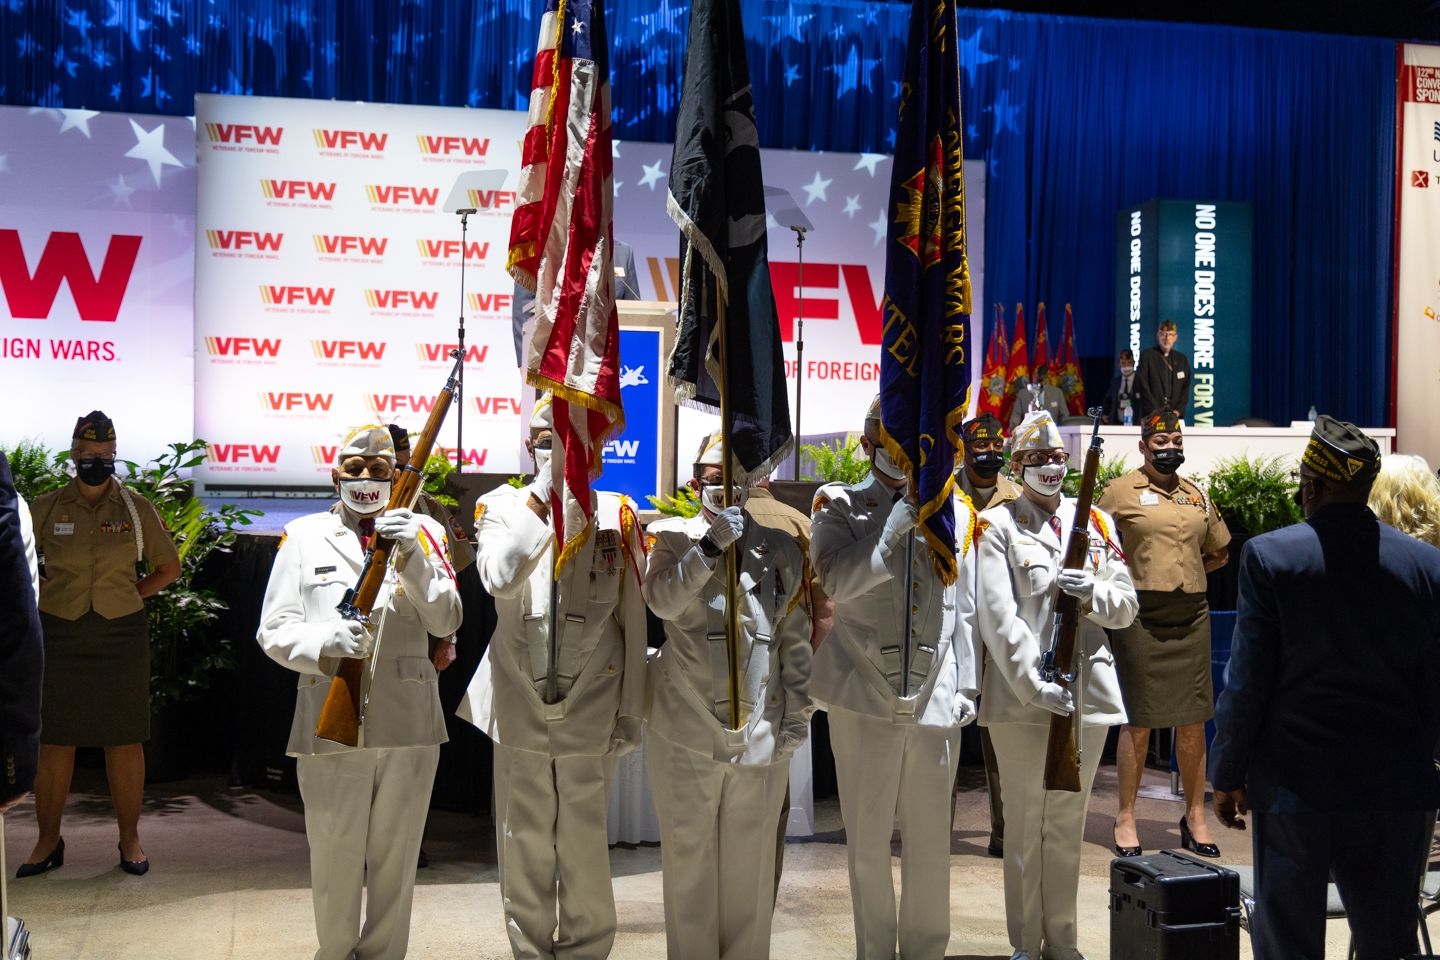 Veterans of Foreign Wars National Convention 30 July 3 August 2021 Kansas City Missouri national Honor guard